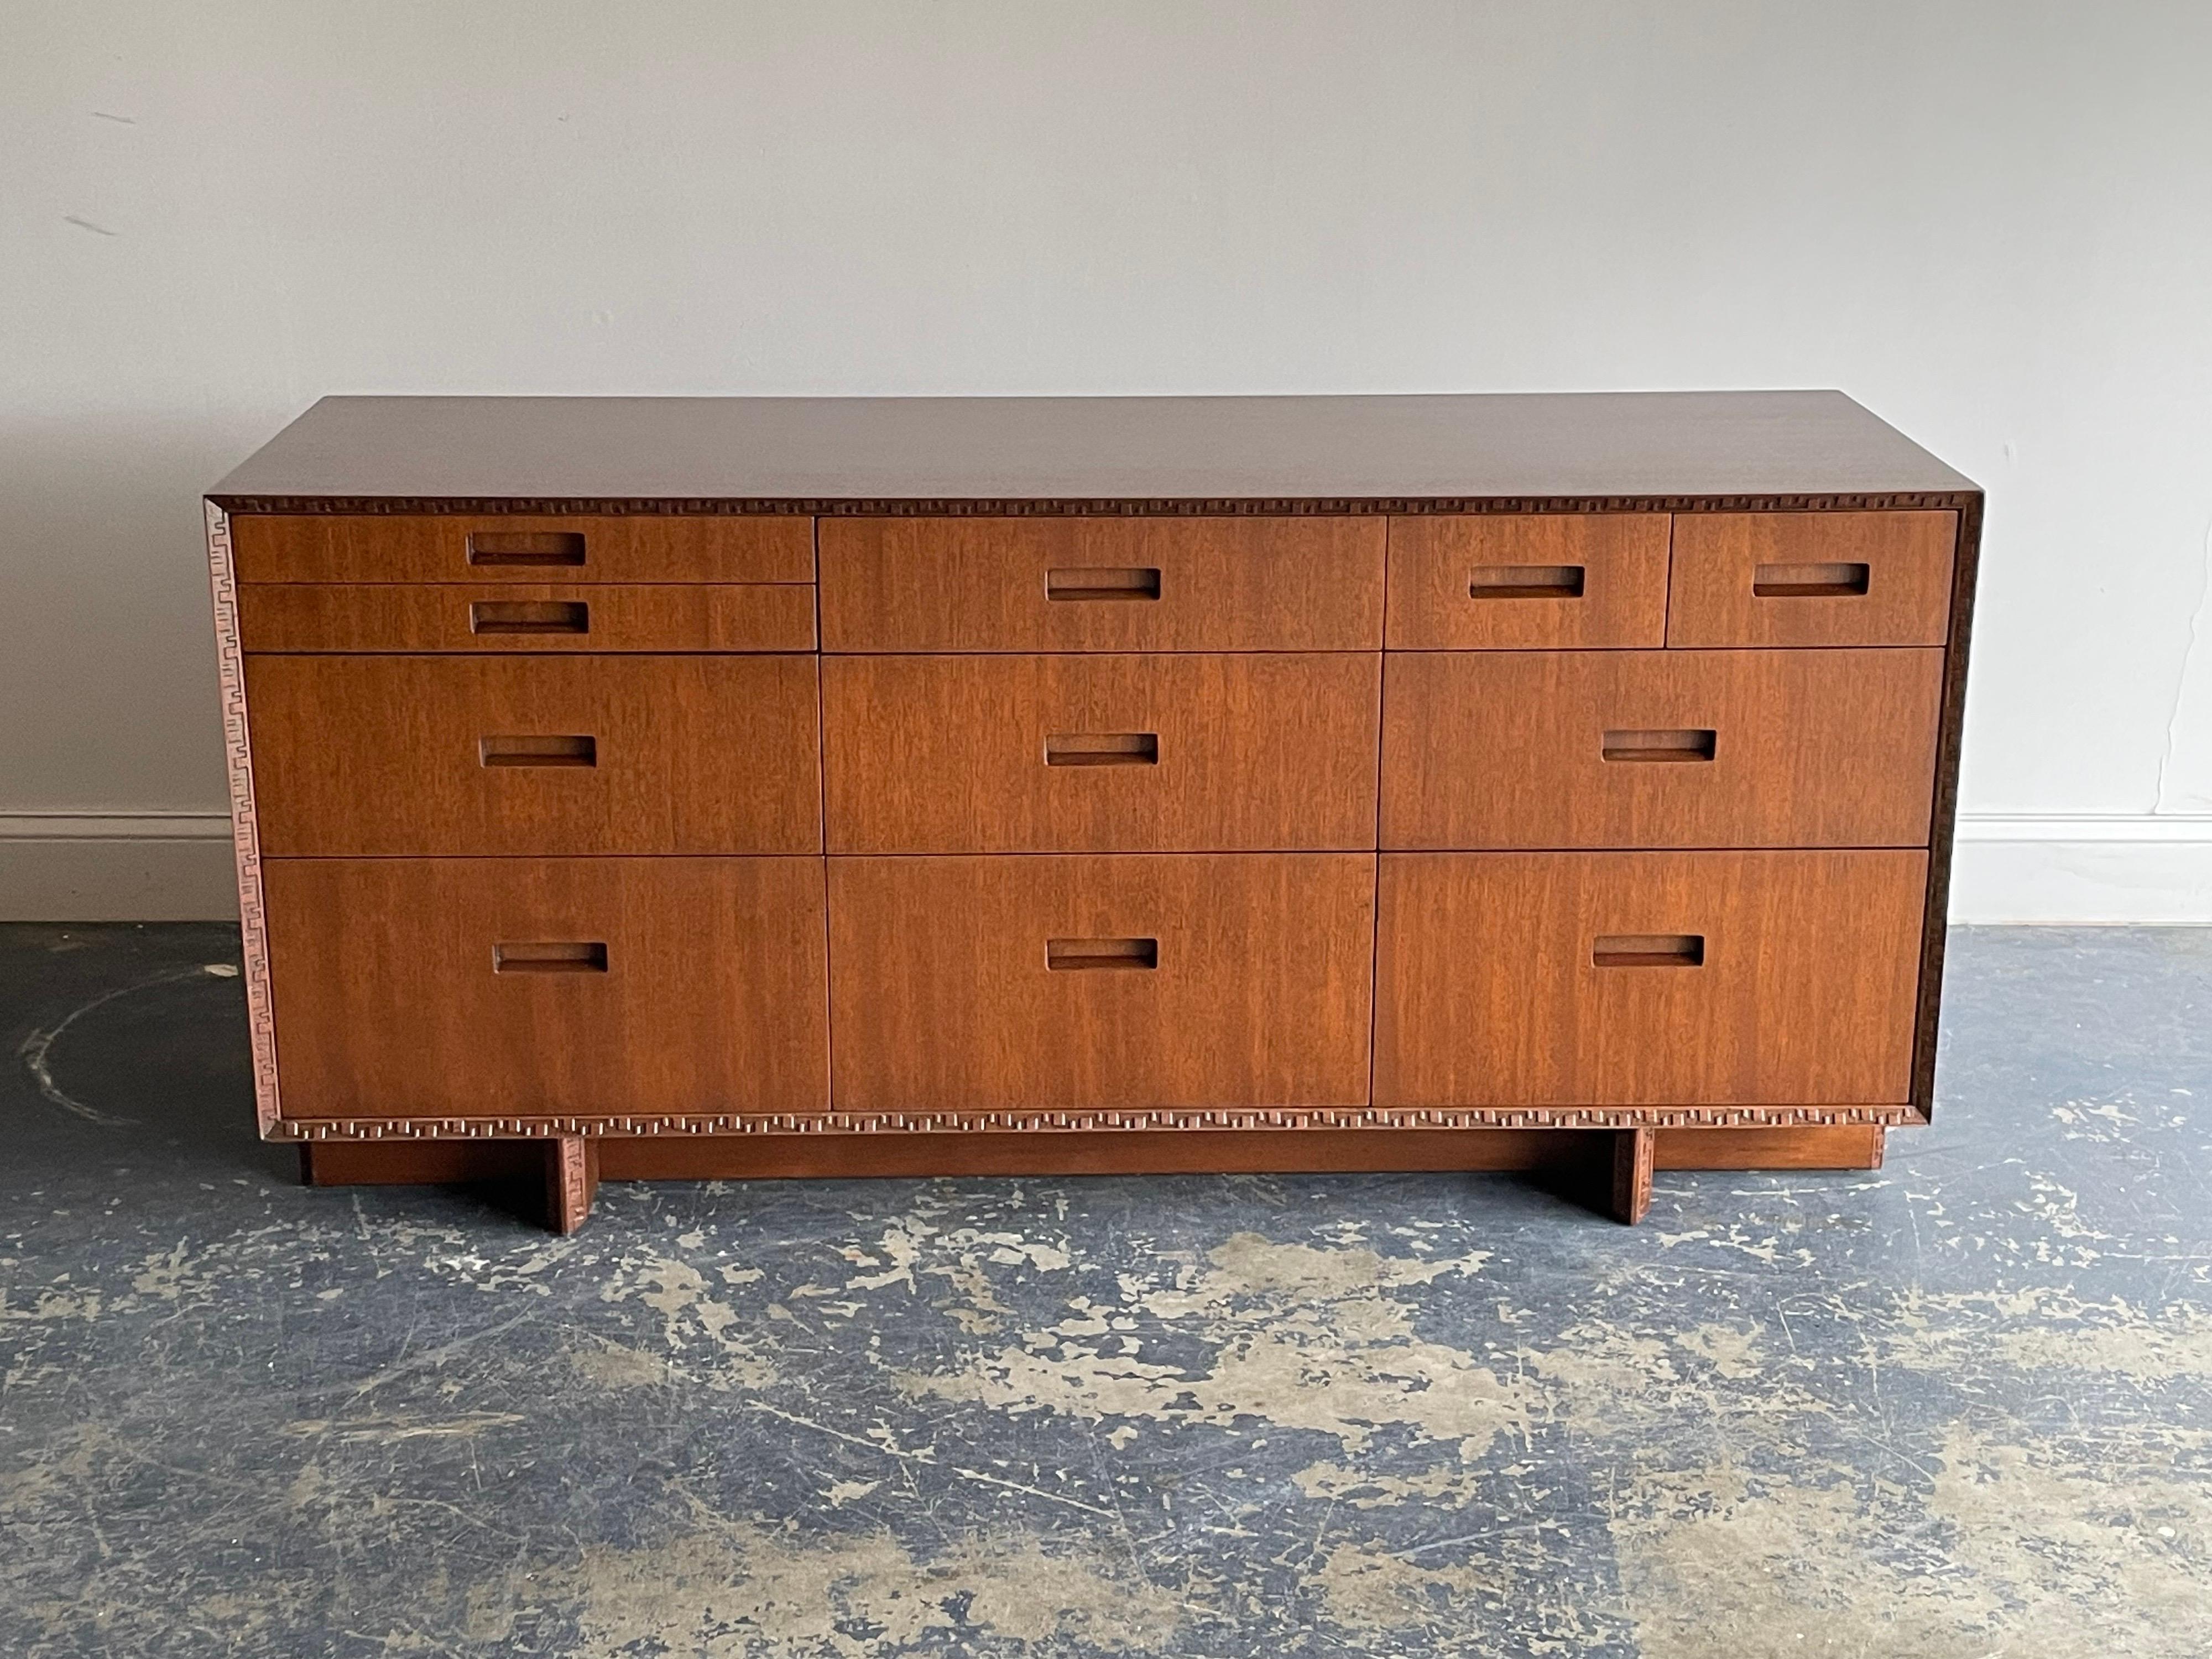 Rare cabinet designed by Frank Lloyd Wright. Exceptional mahogany grain and iconic Taliesin border. This is a versatile piece which could work in a variety of settings.